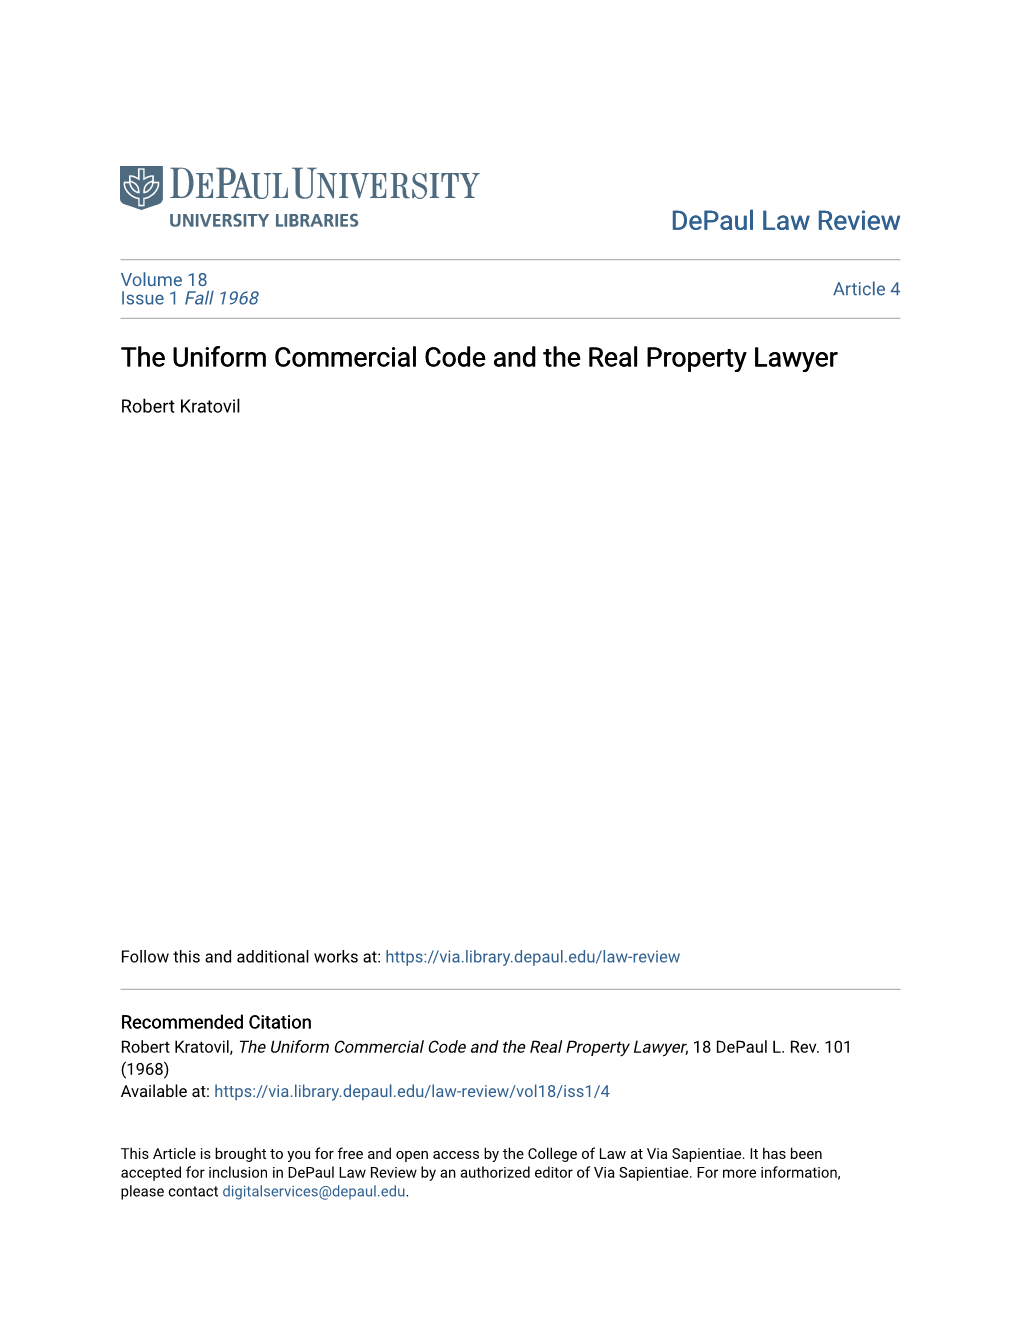 The Uniform Commercial Code and the Real Property Lawyer